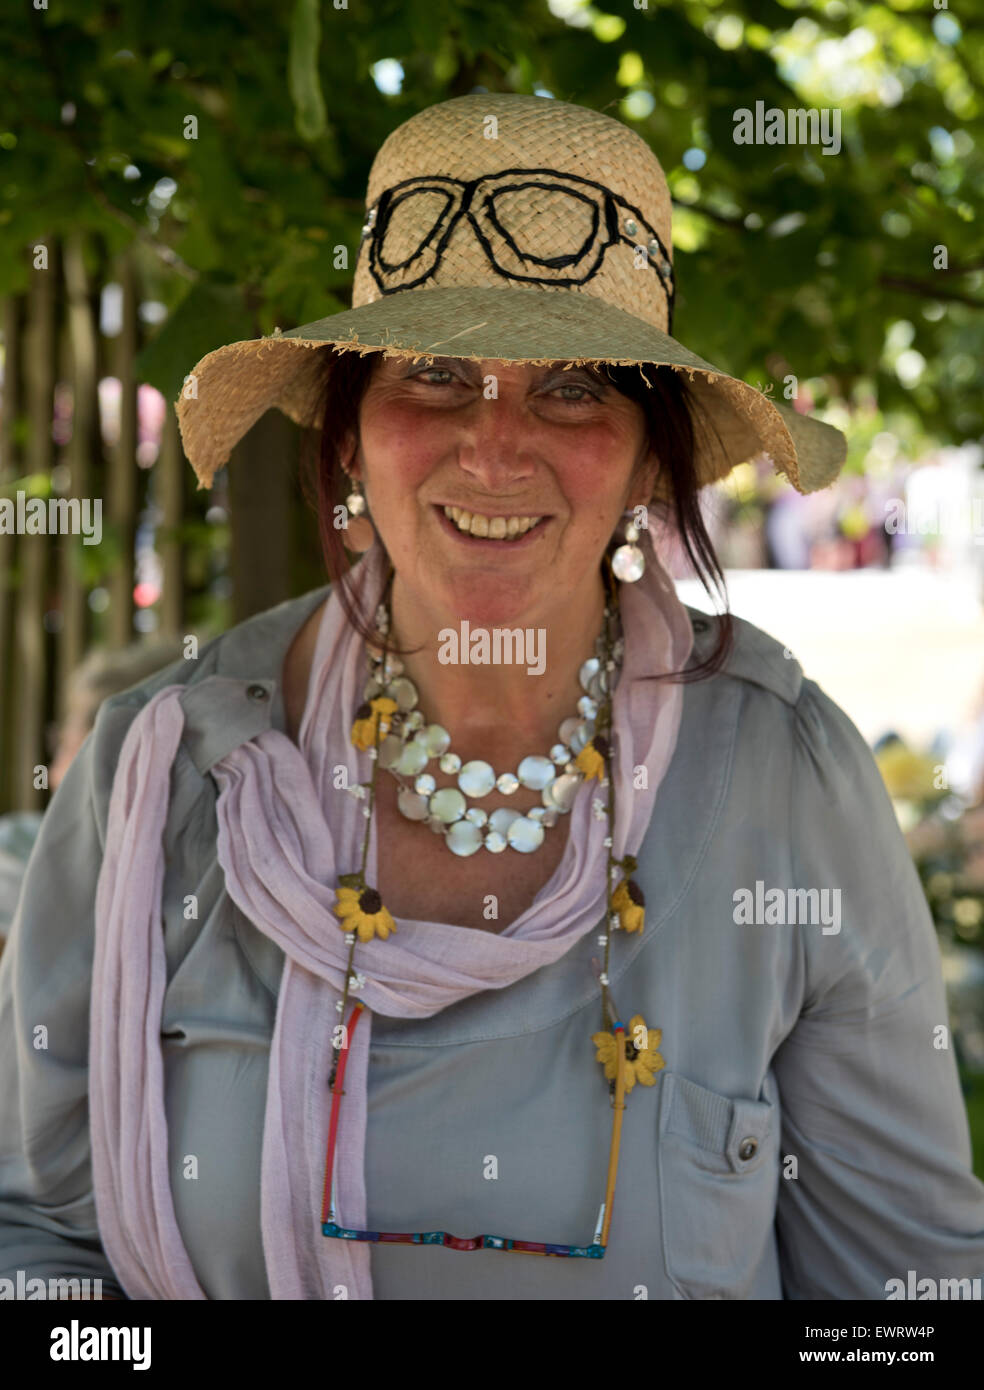 Hmapton, Surrey, UK. 30th June, 2015. A woman wearing a straw hat at The Hampton Court Palace Flower Show in East Moseley, Surrey, UK Credit:  Ellen Rooney/Alamy Live News Stock Photo